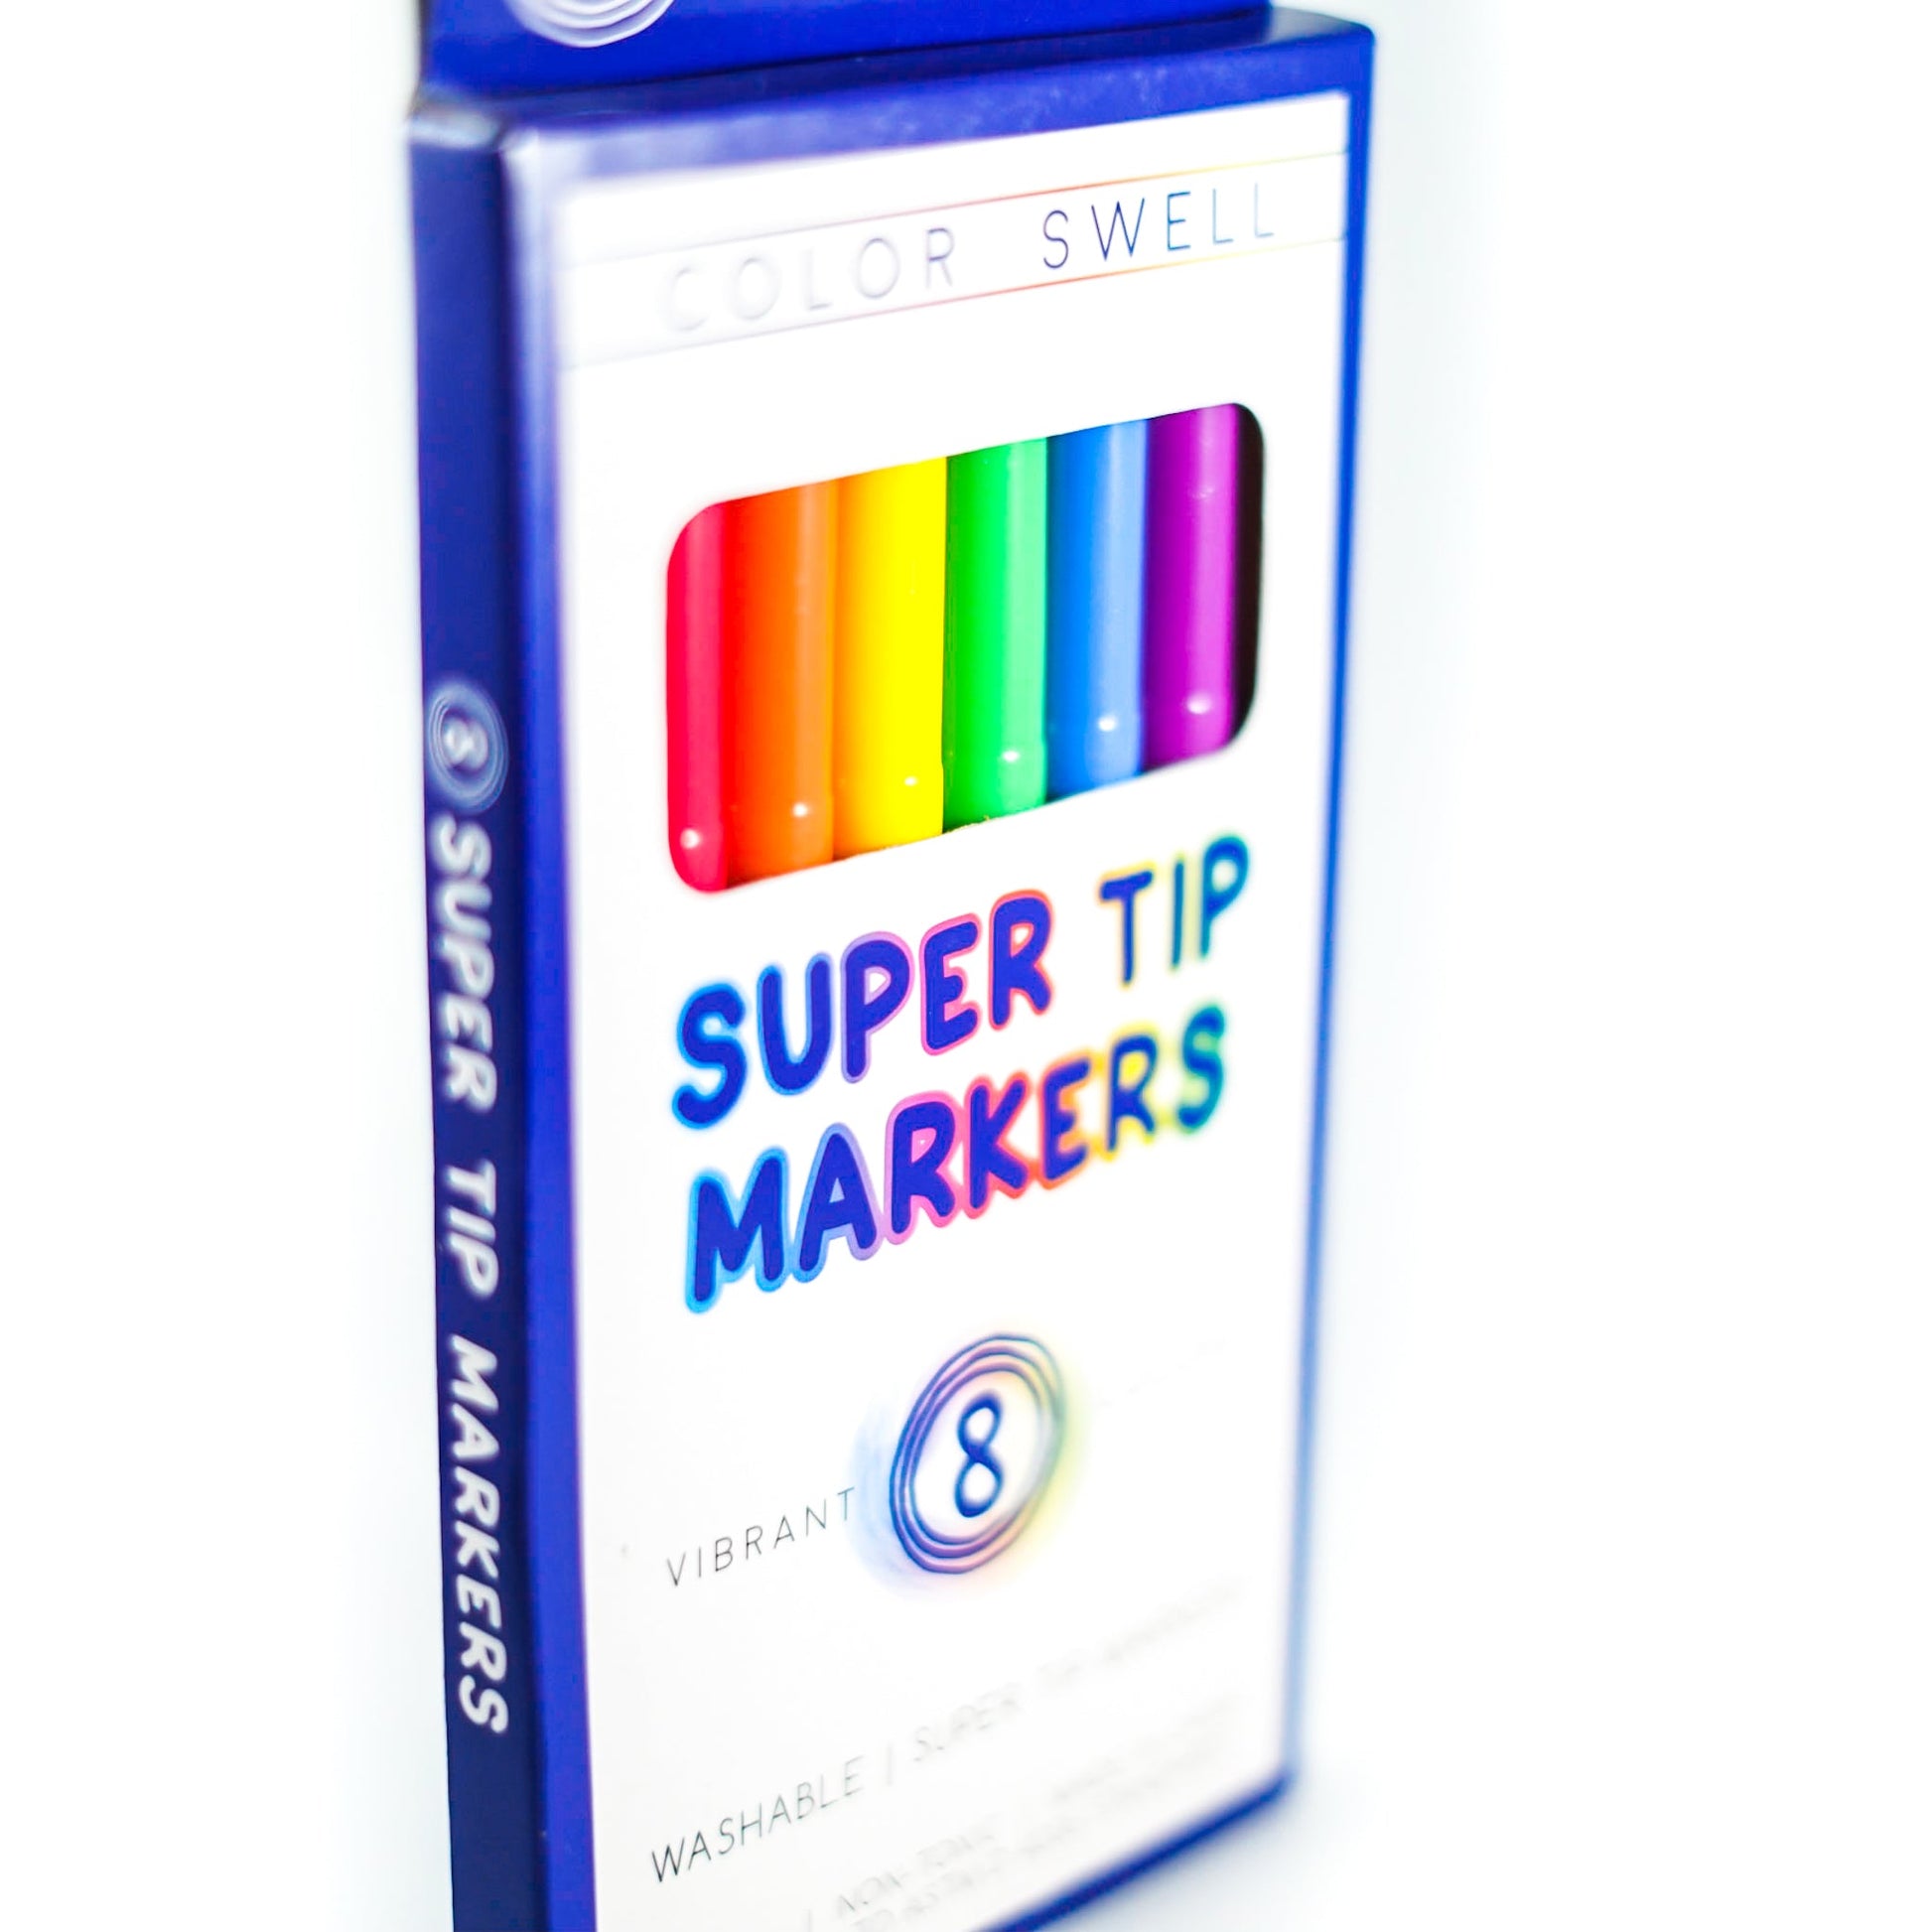 Color Swell Super Tip Washable Markers Bulk Pack 36 Boxes of 8 Vibrant Colors (288 Total) Color Swell